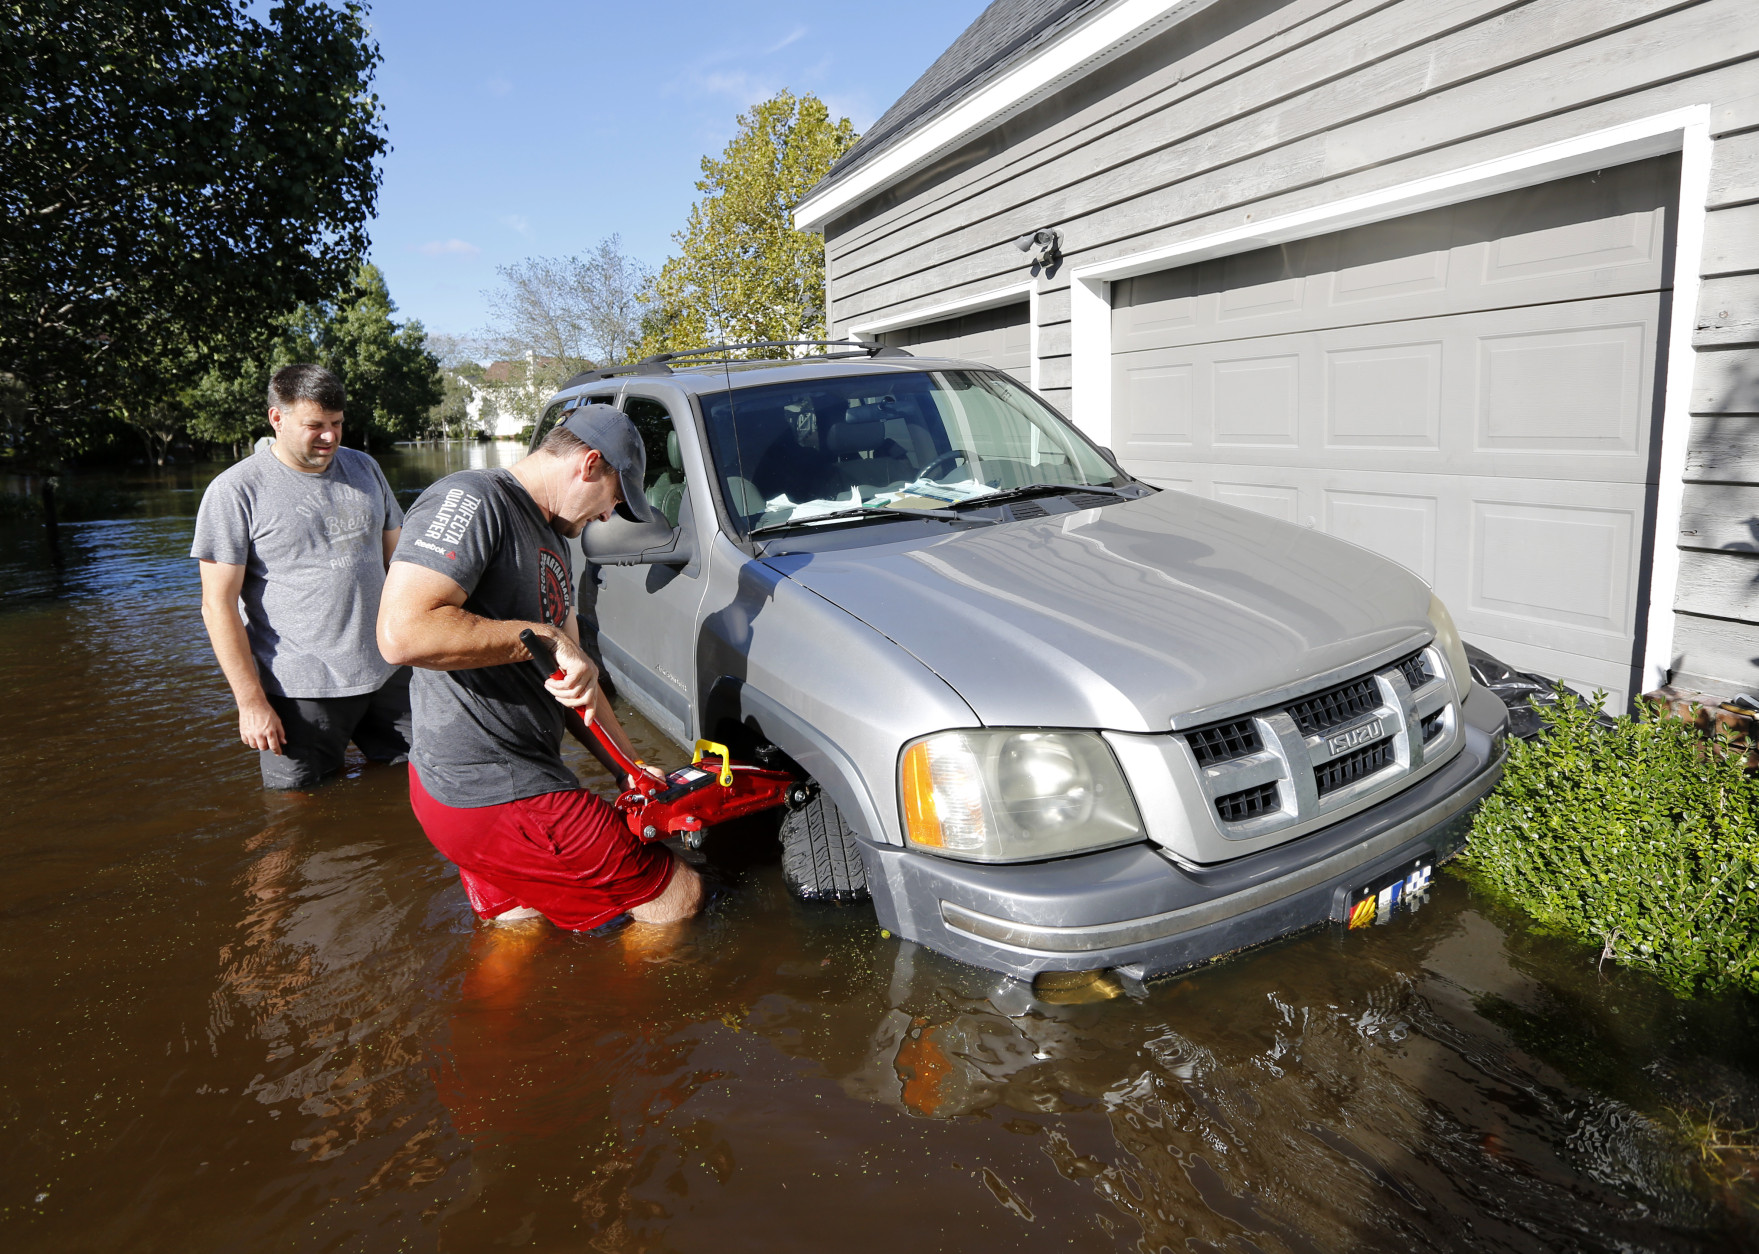 Ethan Abbott, at right, helps friend, Jan-Patrick Gros try to jack up Gros' vehicle to get it out of floodwaters in the Ashborough subdivision near Summerville, S.C., Tuesday, Oct. 6, 2015. Residents are concerned that the Ashley river will continue to rise as floodwaters come down from Columbia.  (AP Photo/Mic Smith)